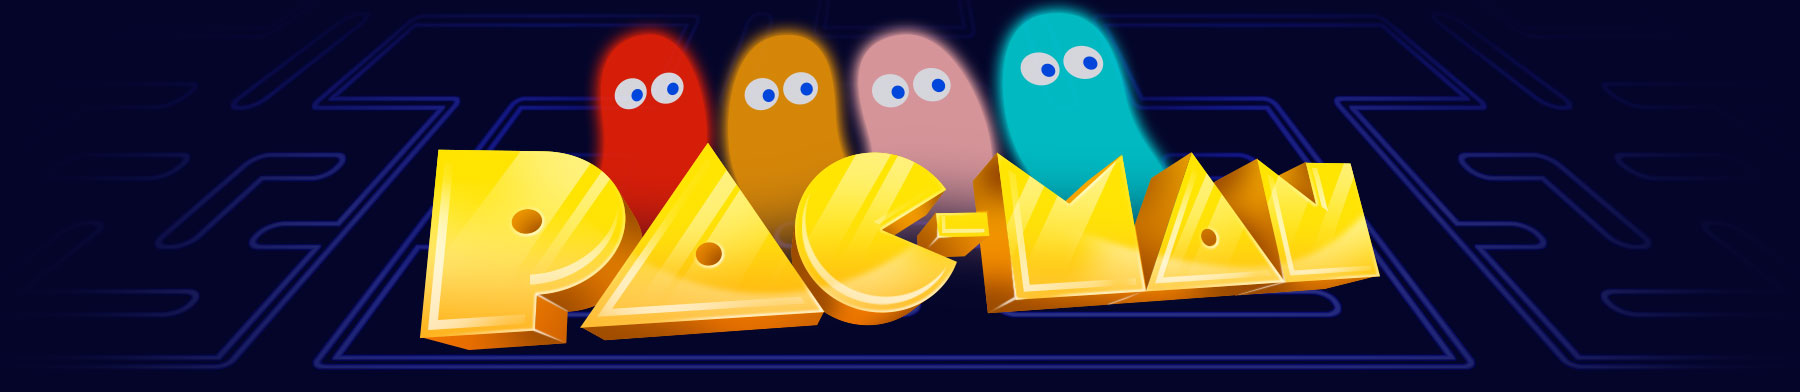 Download Pacman Game Vector at Vectorified.com | Collection of ...